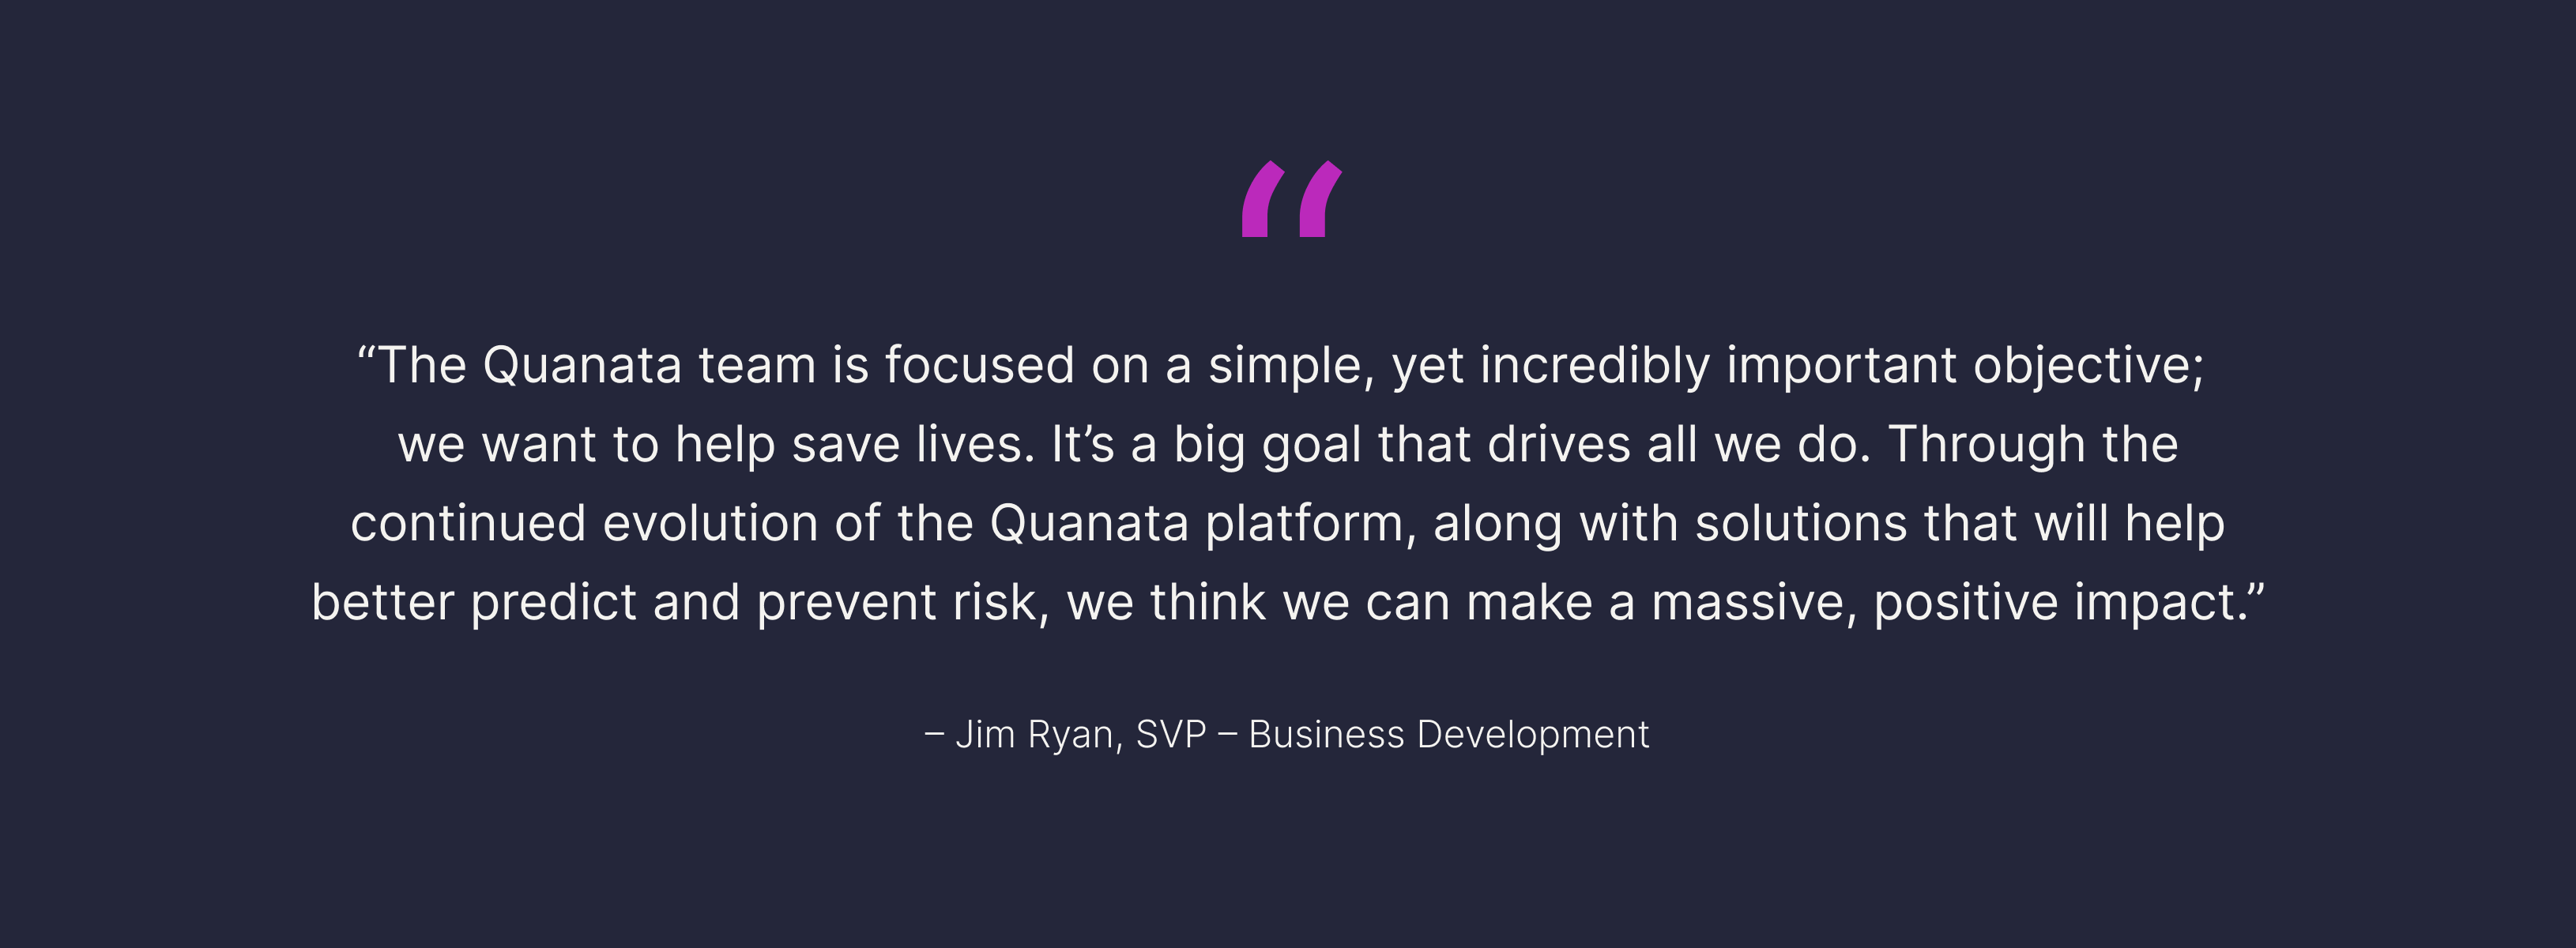 Quote image by Jim Ryan, SVP of Business Development, about Quanata's goal to save lives through platform evolution and risk prediction.